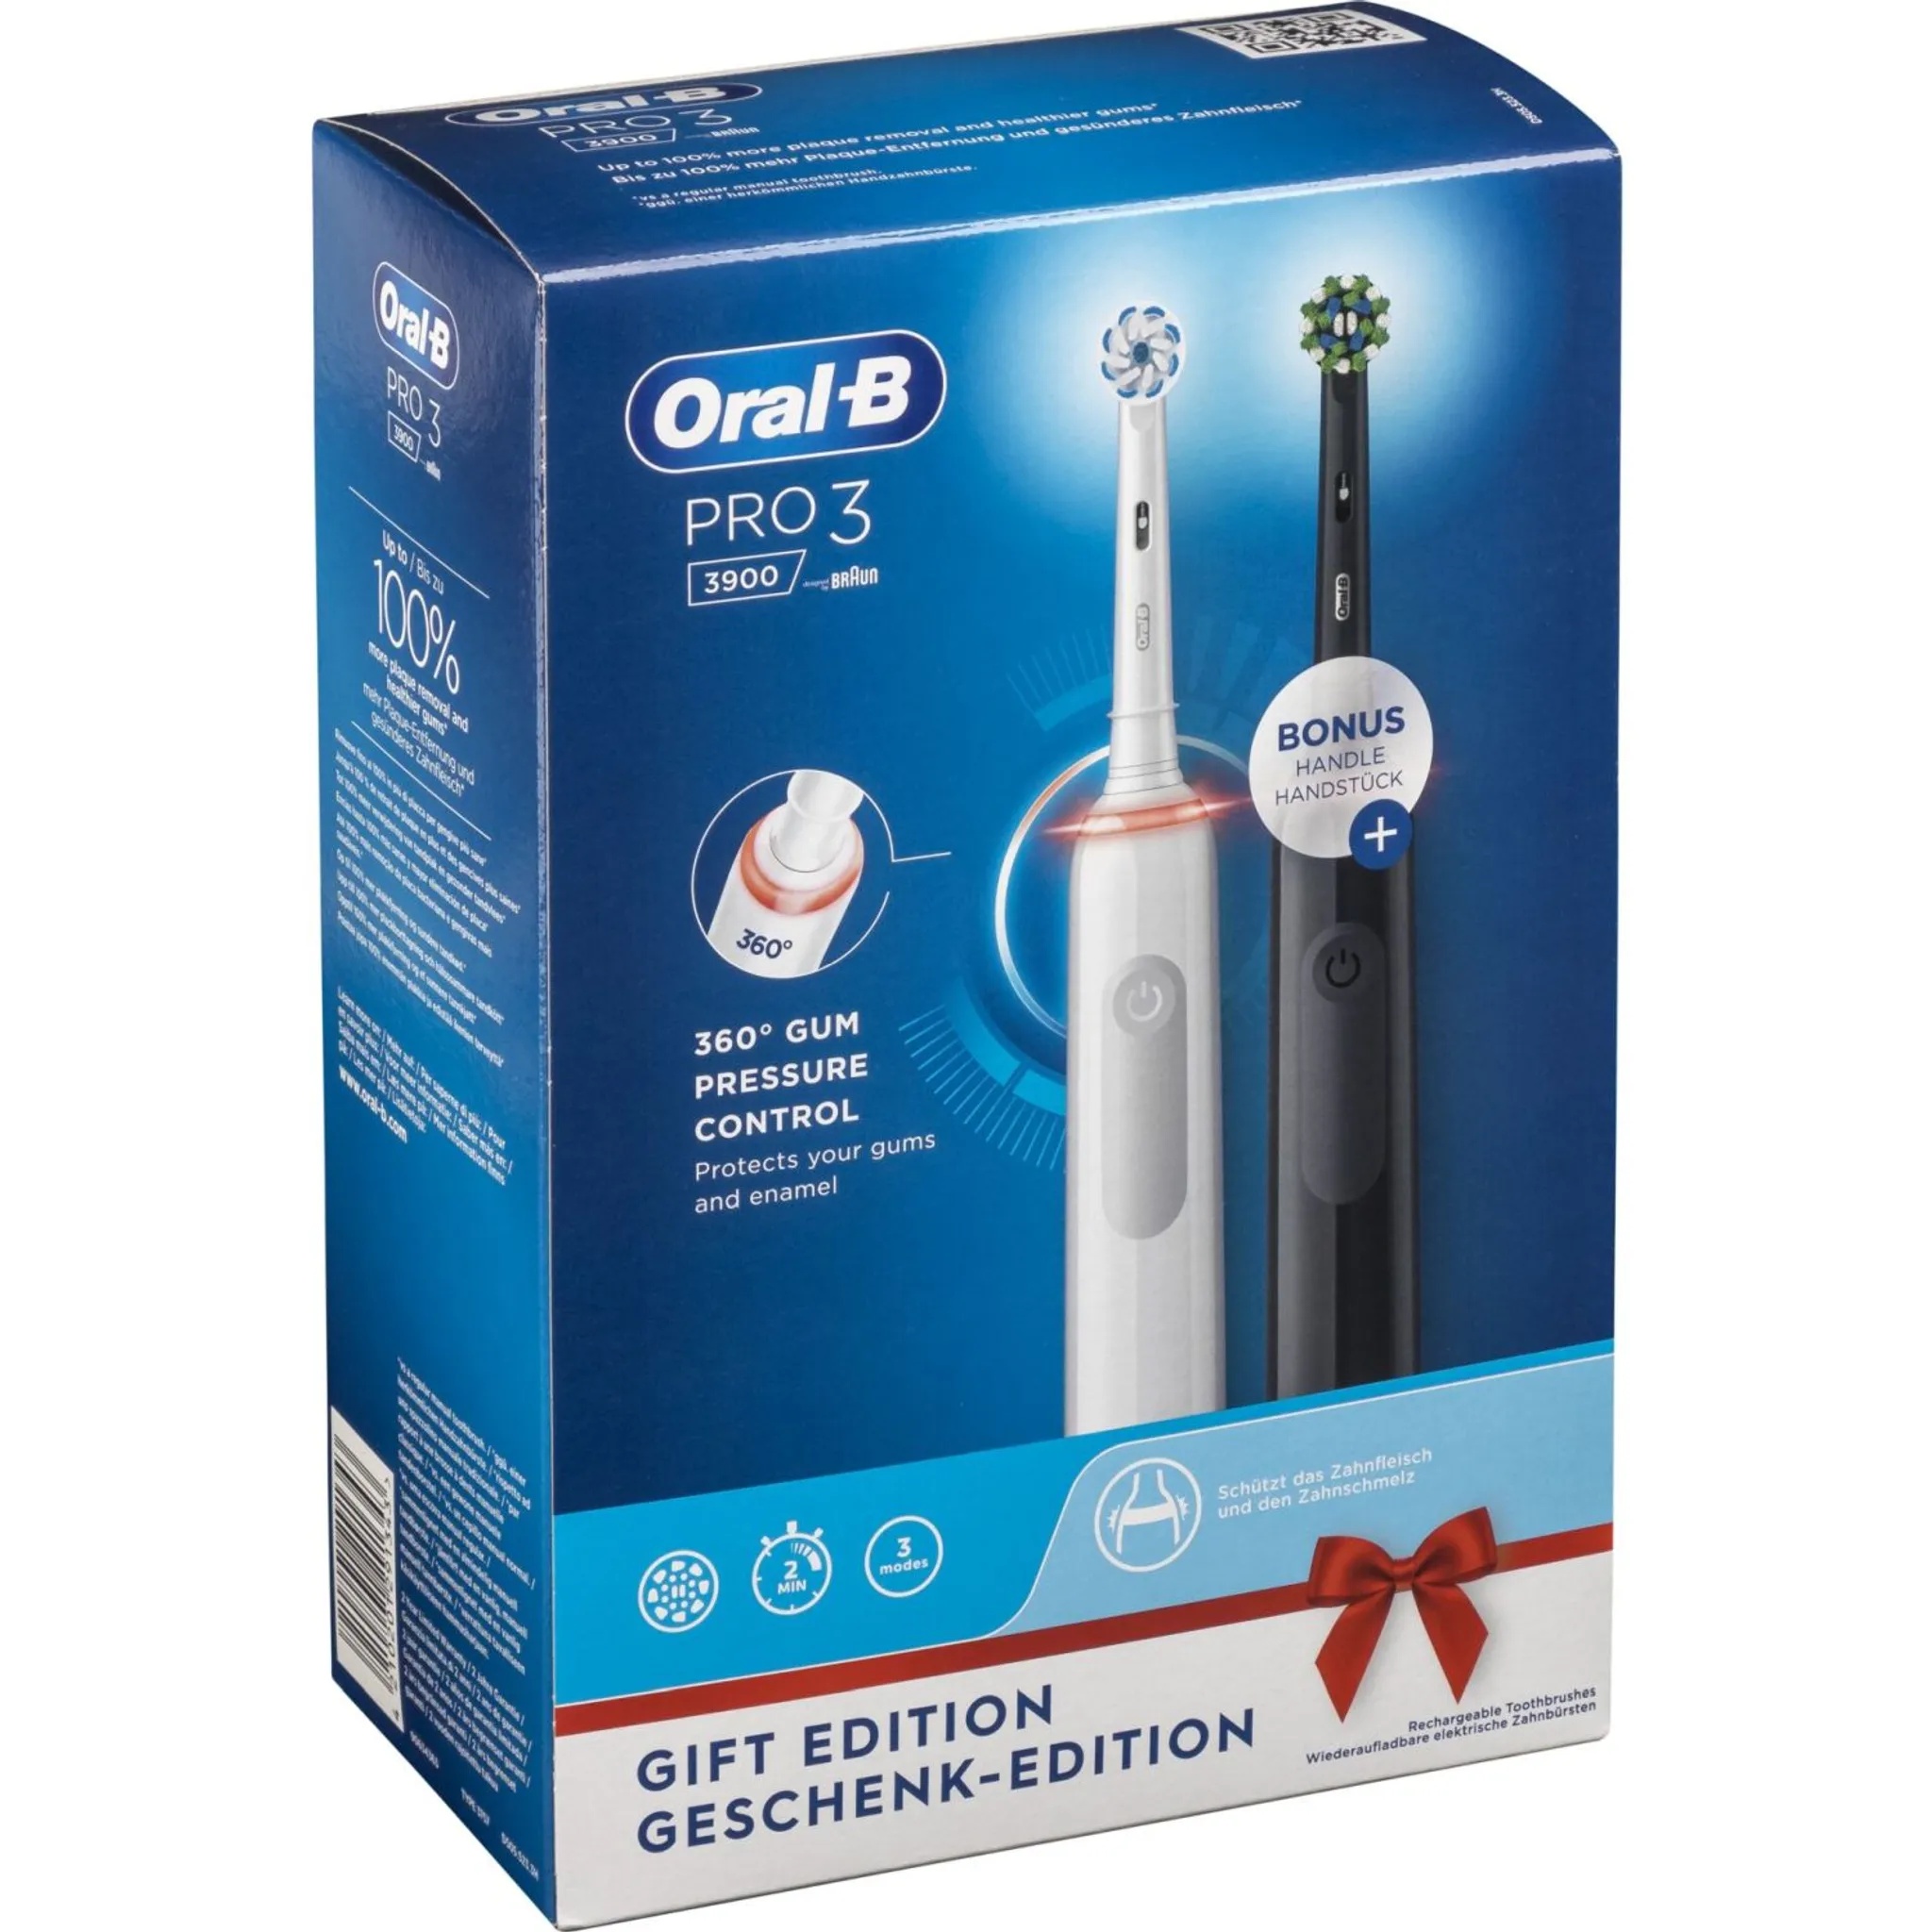 Edition Black-White 3900 PRO 3 Oral-B Duopack